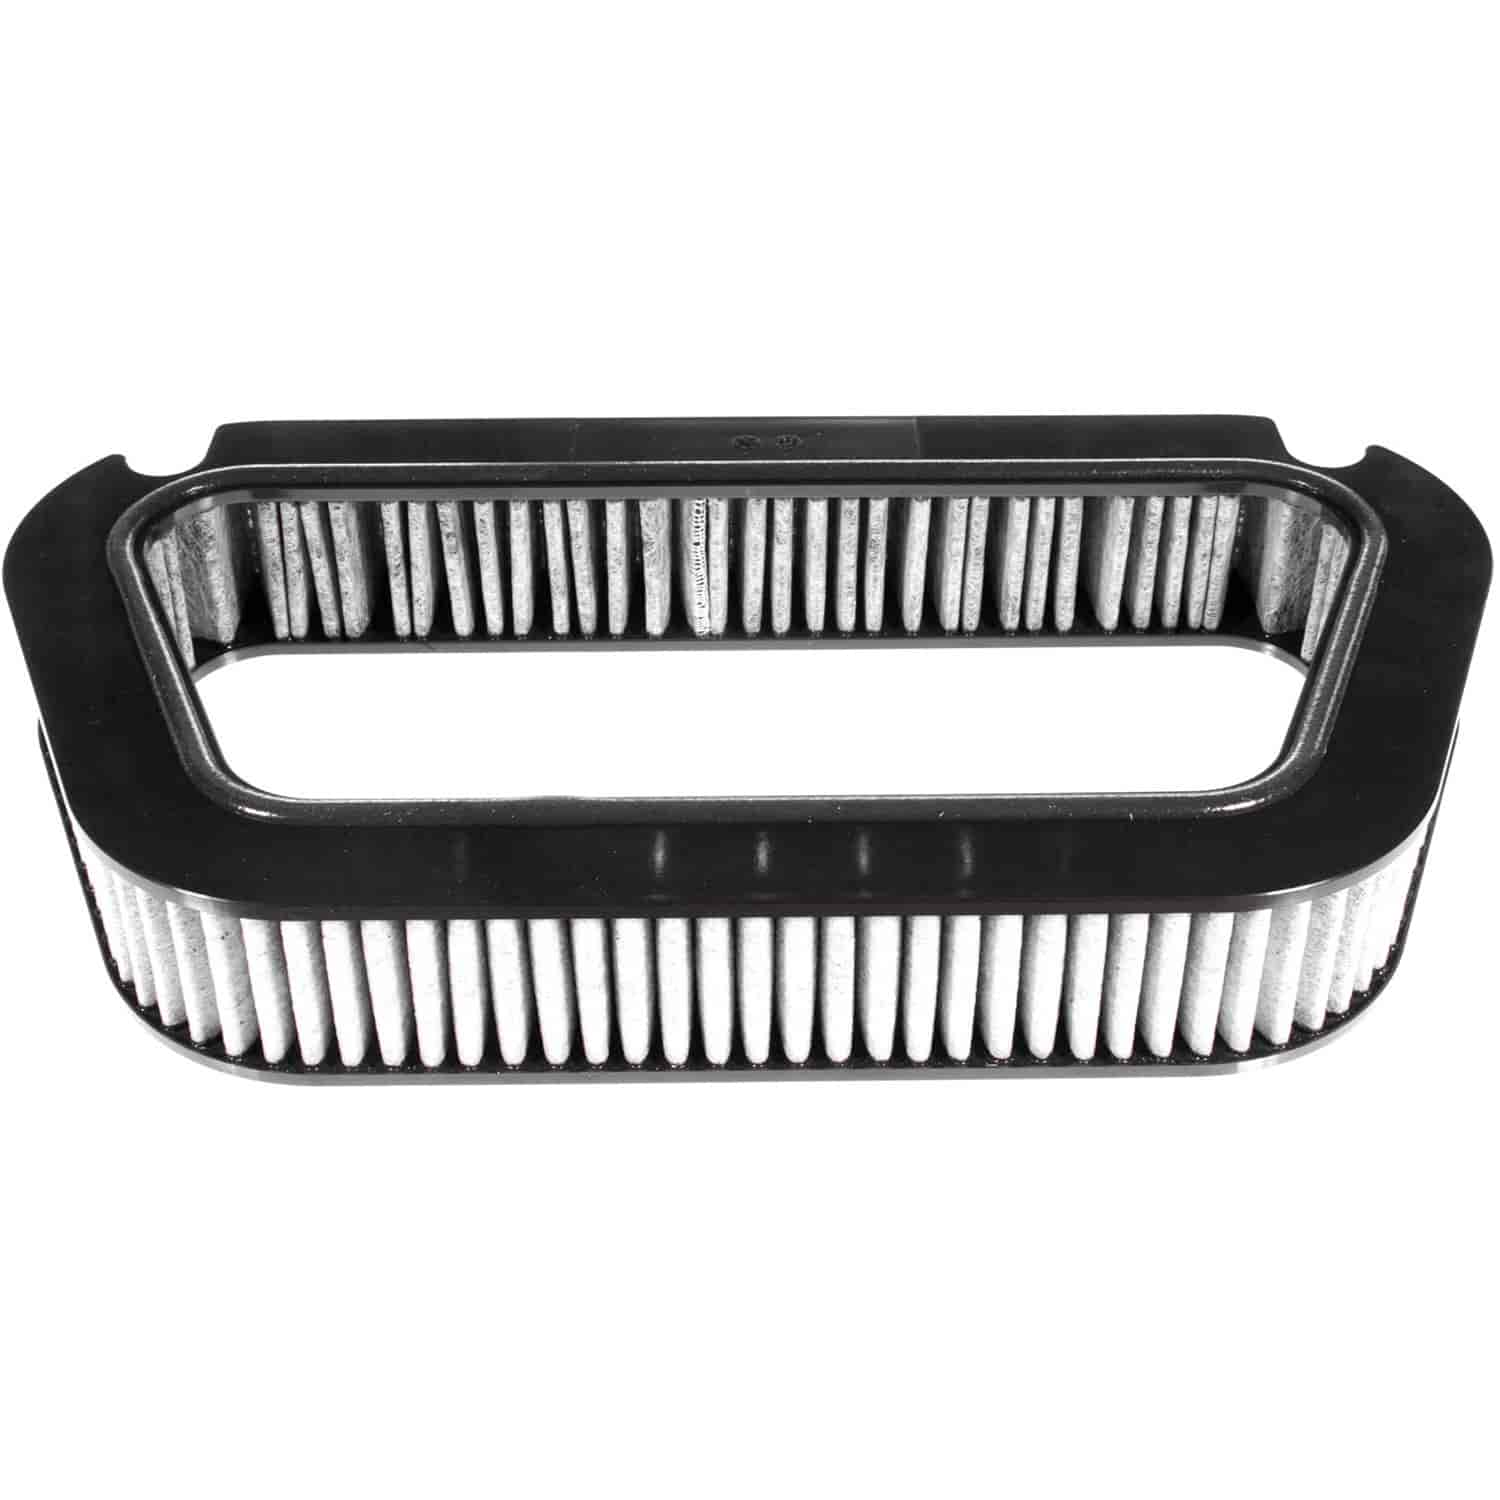 Mahle Cabin Air Filter Audi A8 4.2L and